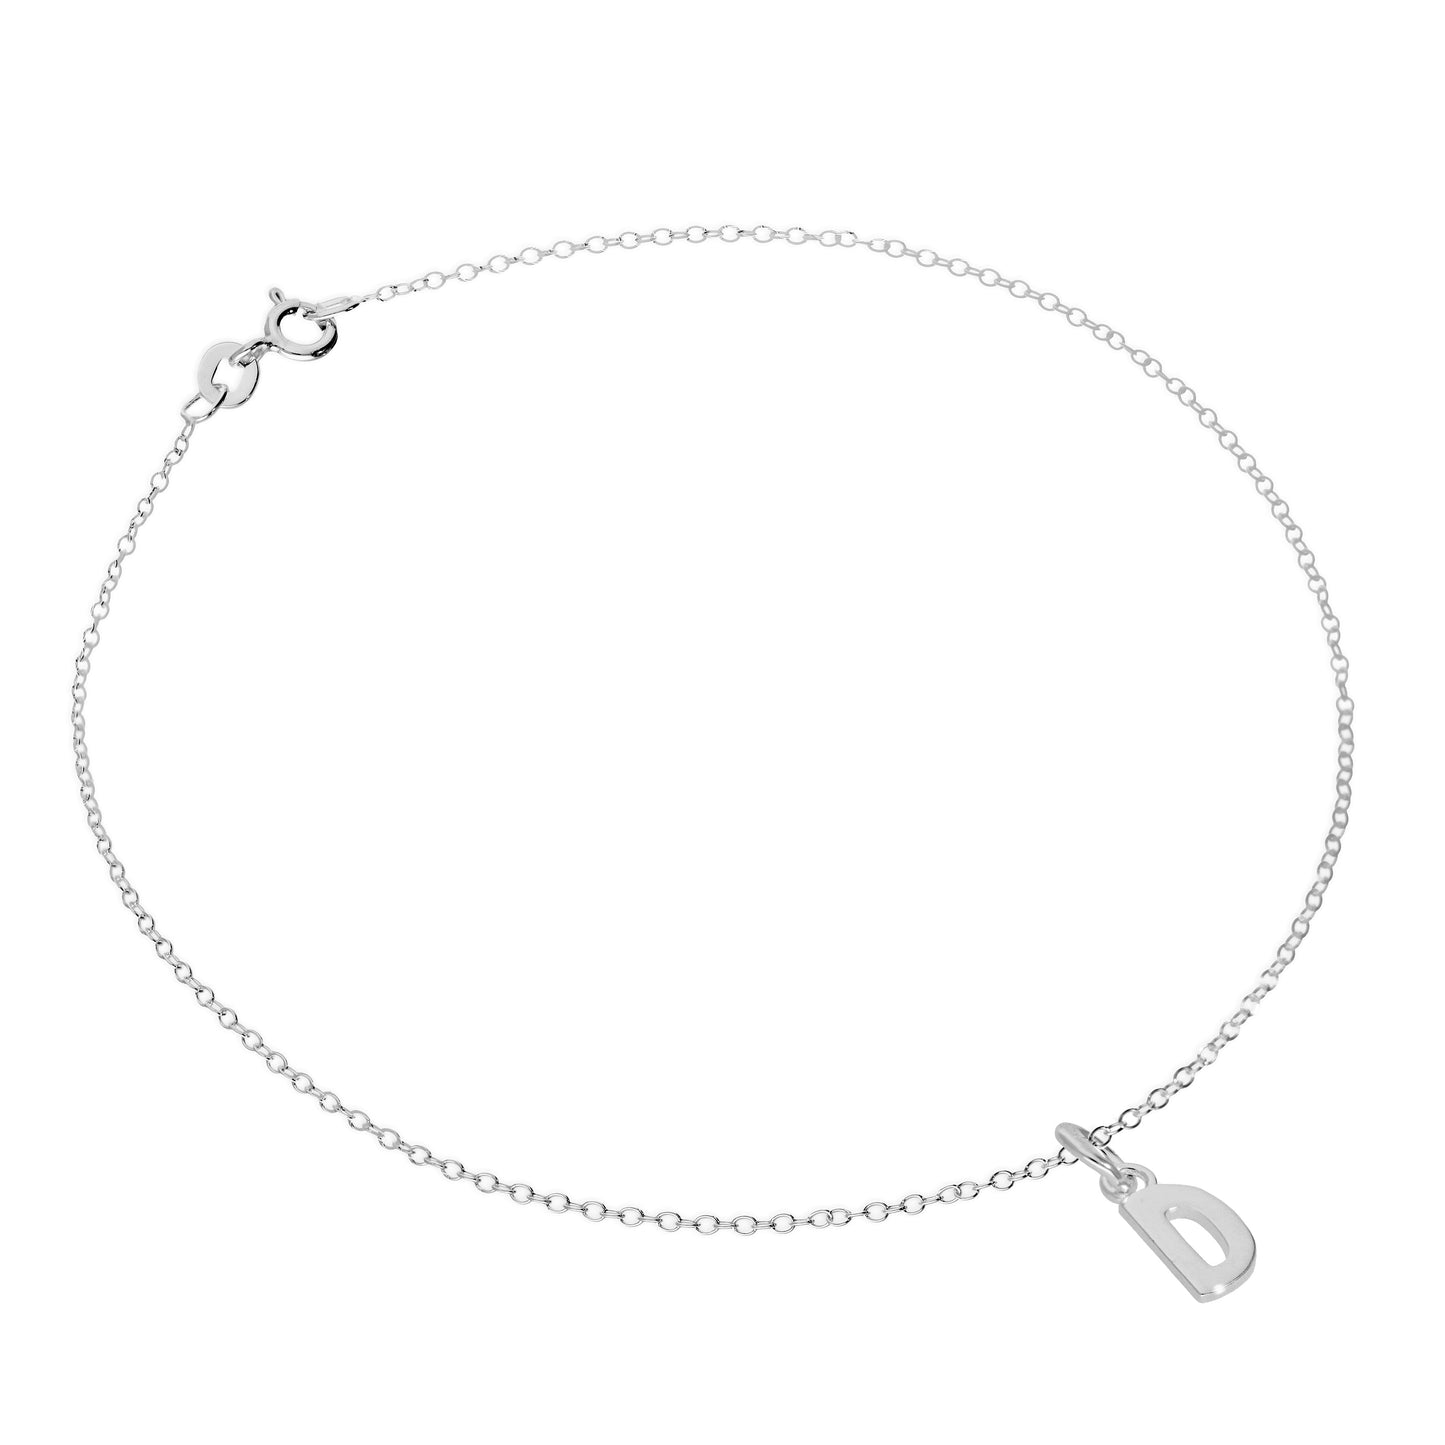 Fine Sterling Silver Belcher Anklet with Alphabet Letter Charm - 10 Inches - A-Z